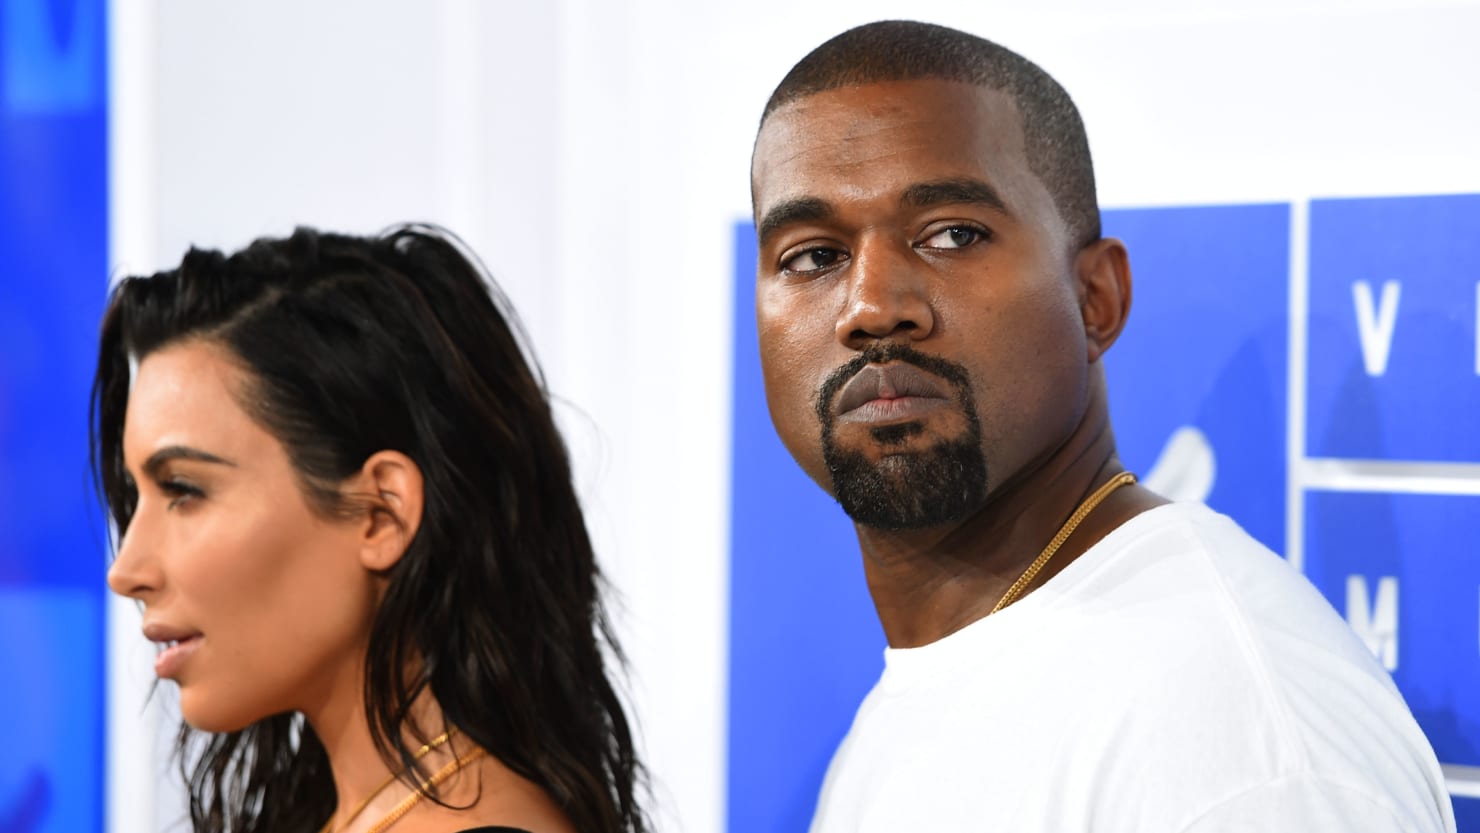 Now Kanye Is Shooting Down Kim K’s Divorce Demands – The Daily Beast